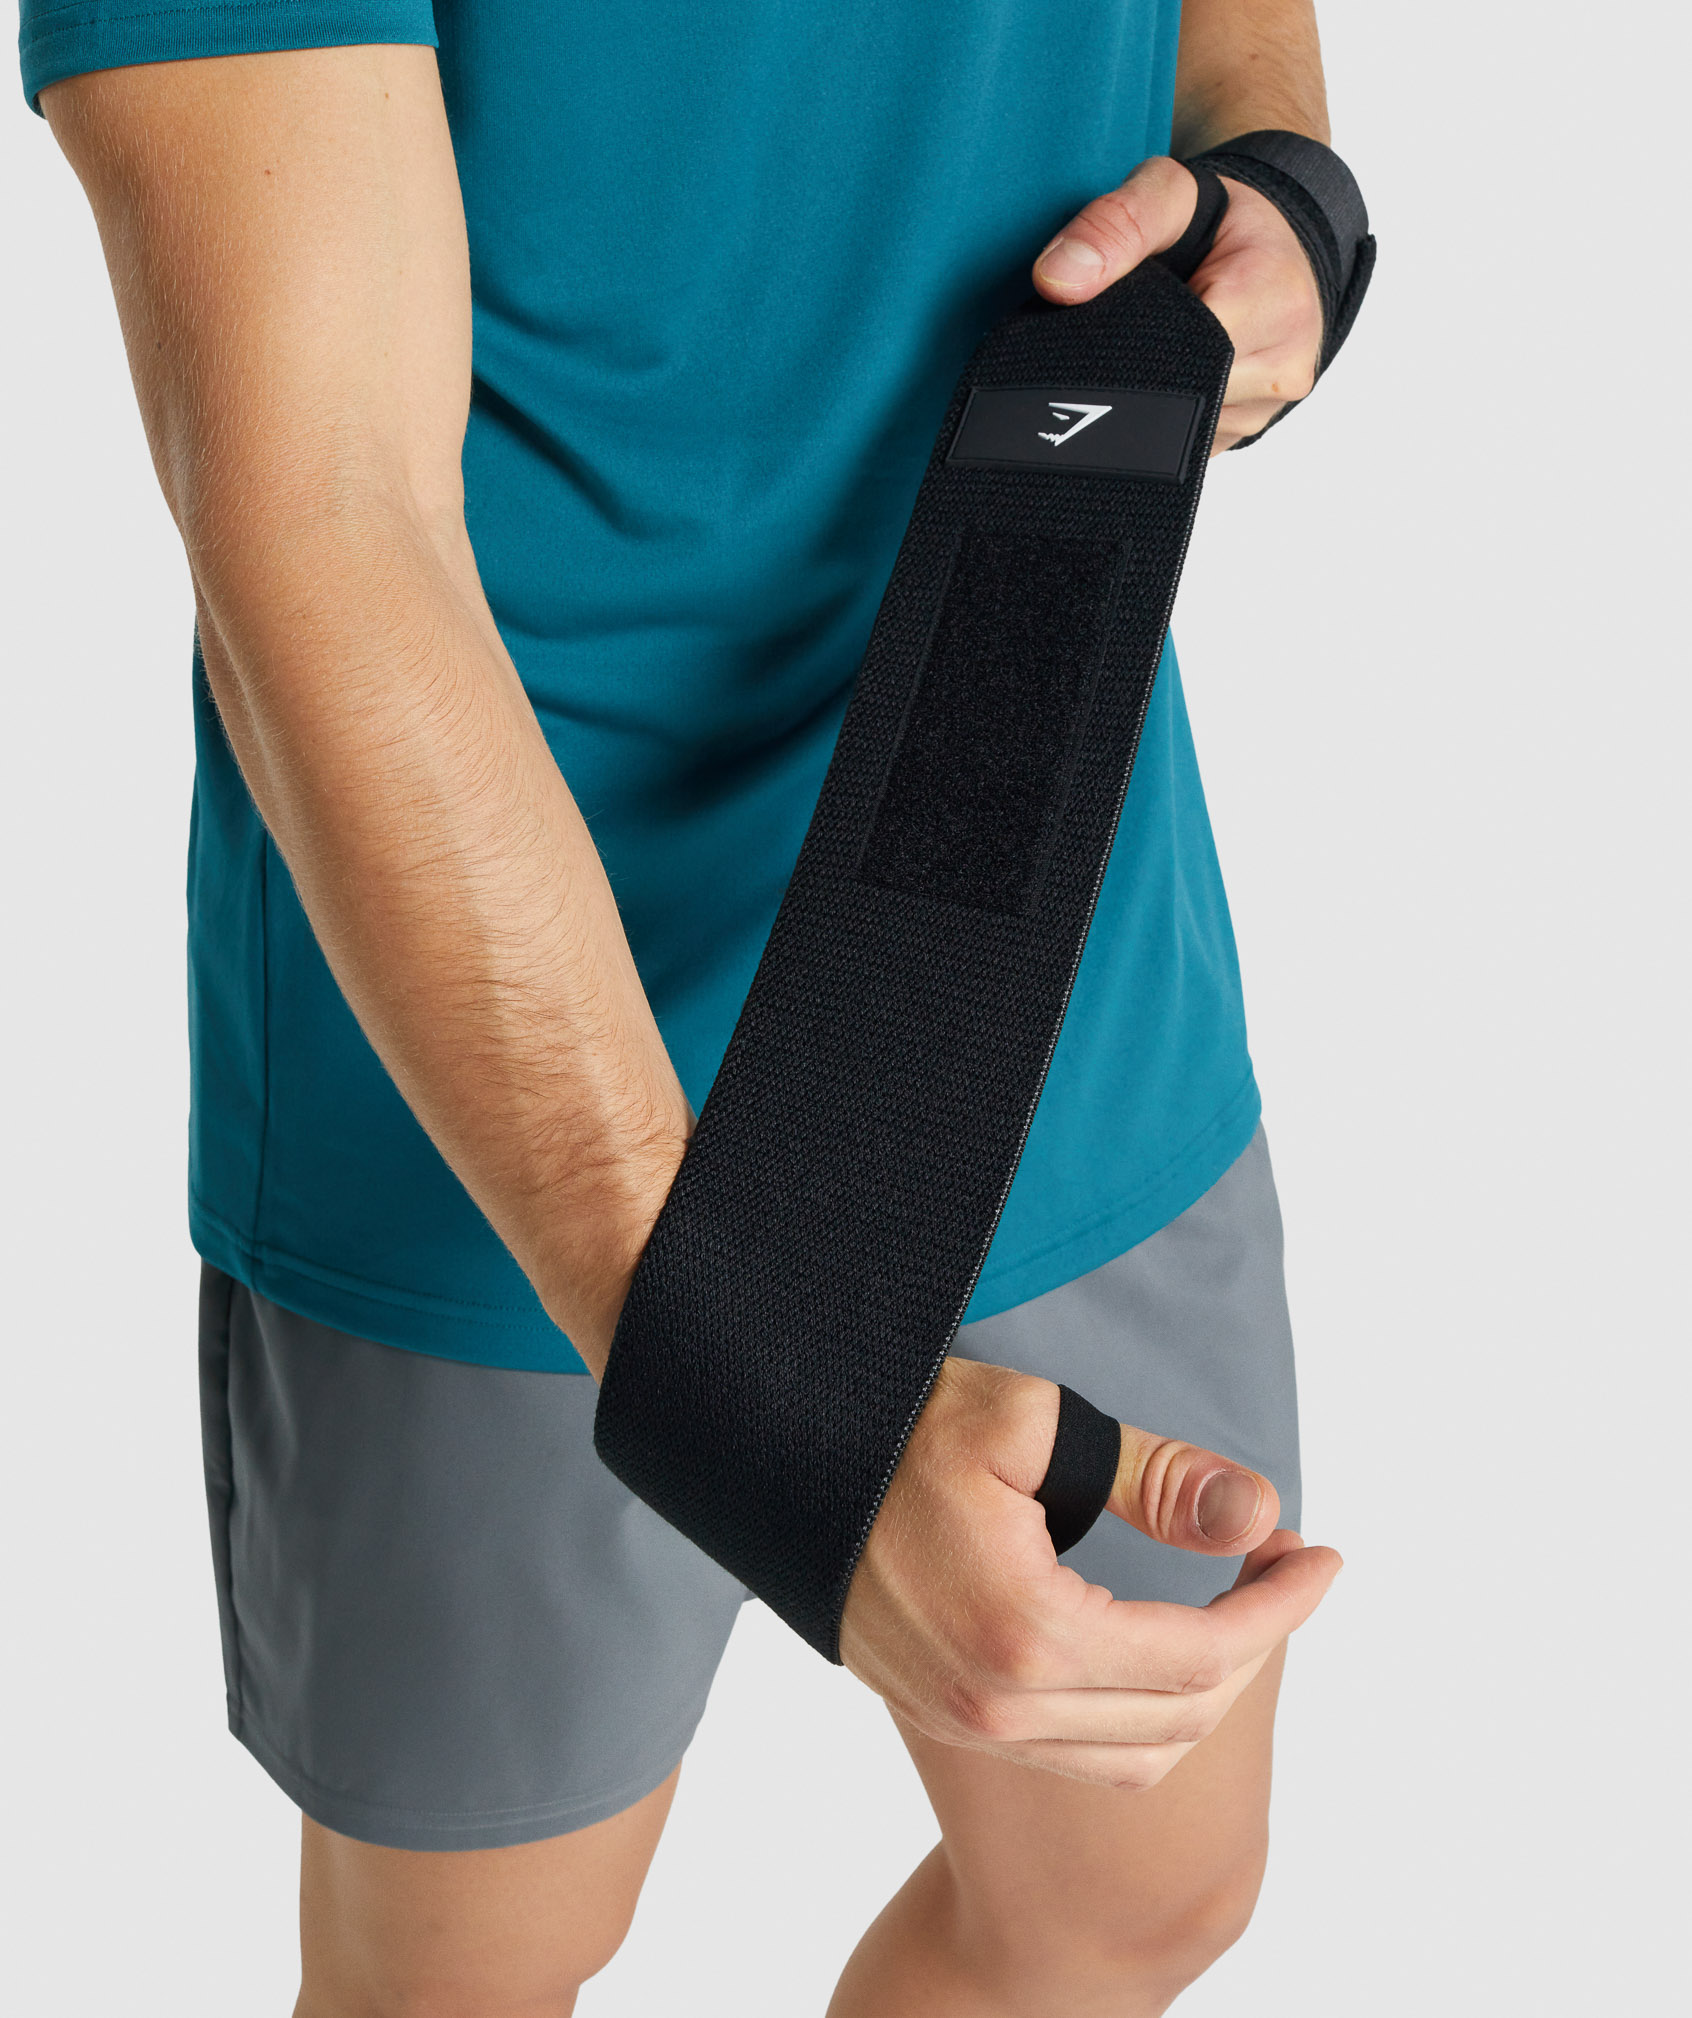 The Benefits Of Weightlifting Gloves, Wrist Wraps And Lifting